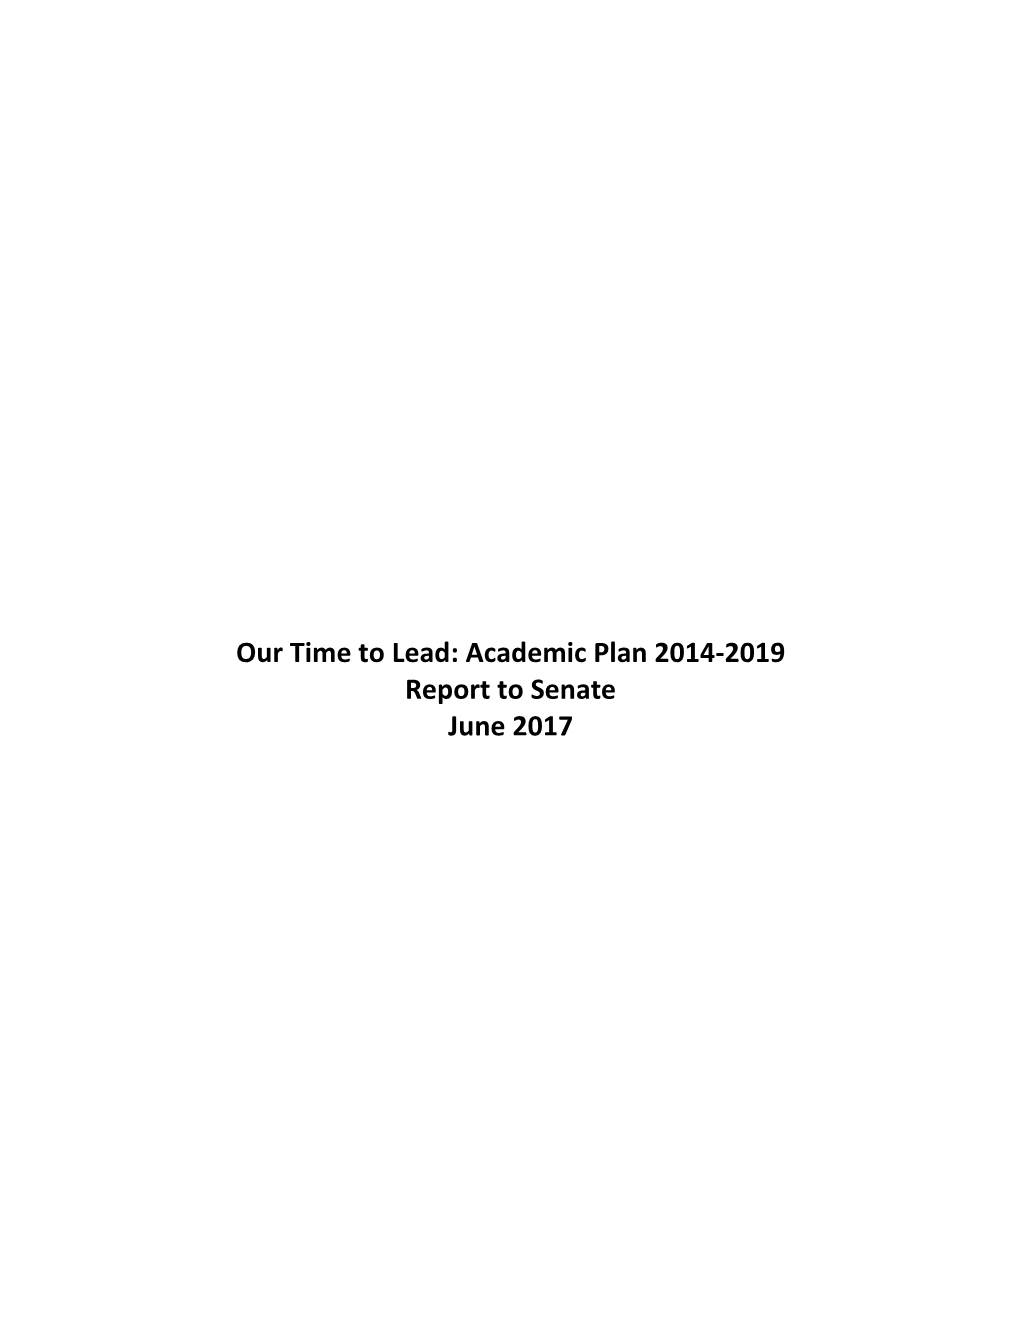 Our Time to Lead: Academic Plan 2014-2019 Report to Senate June 2017